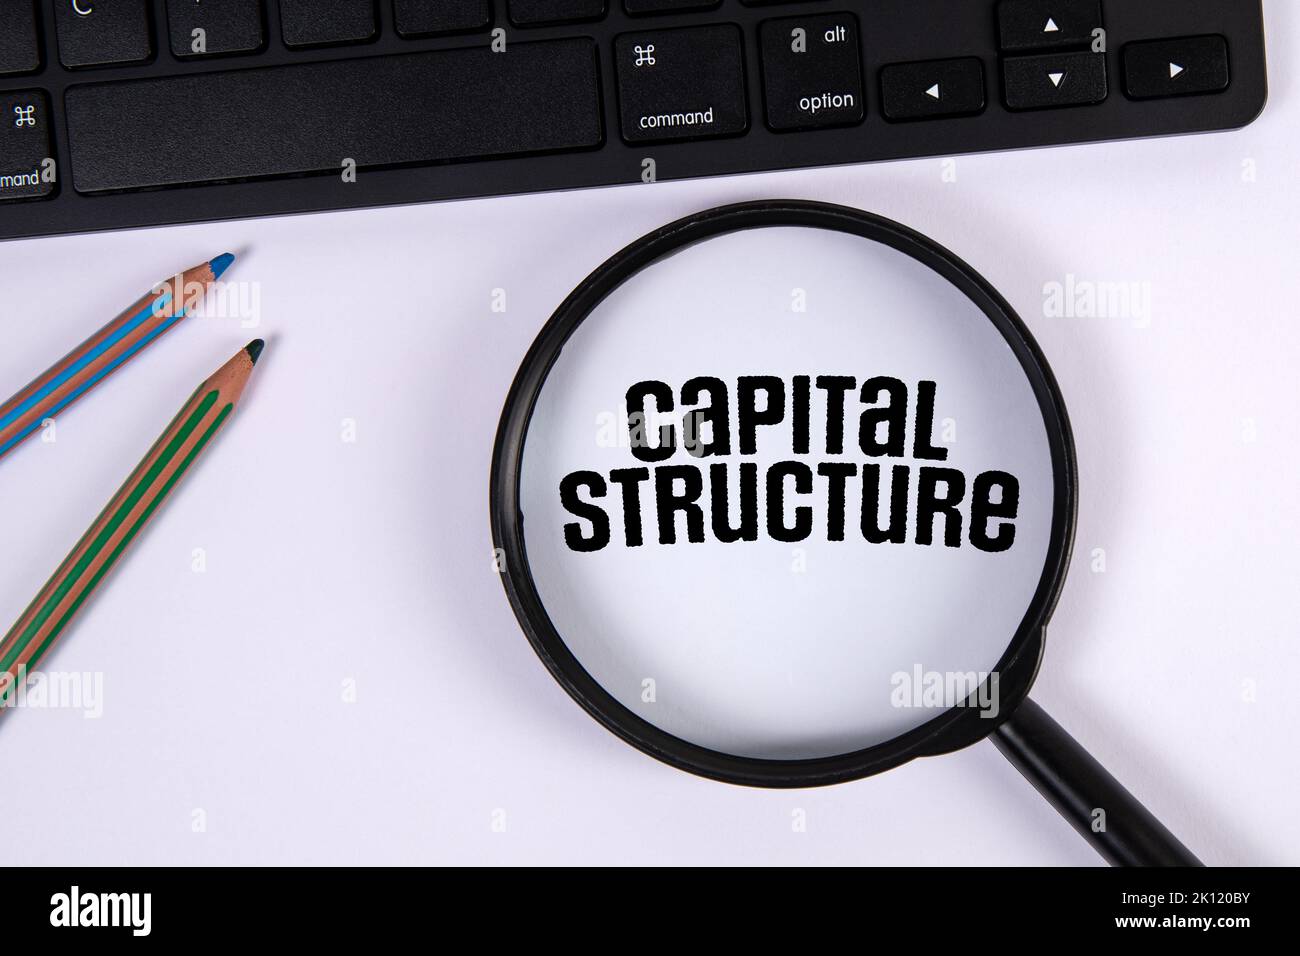 Capital Structure. Computer keyboard and magnifying glass on white background. Stock Photo